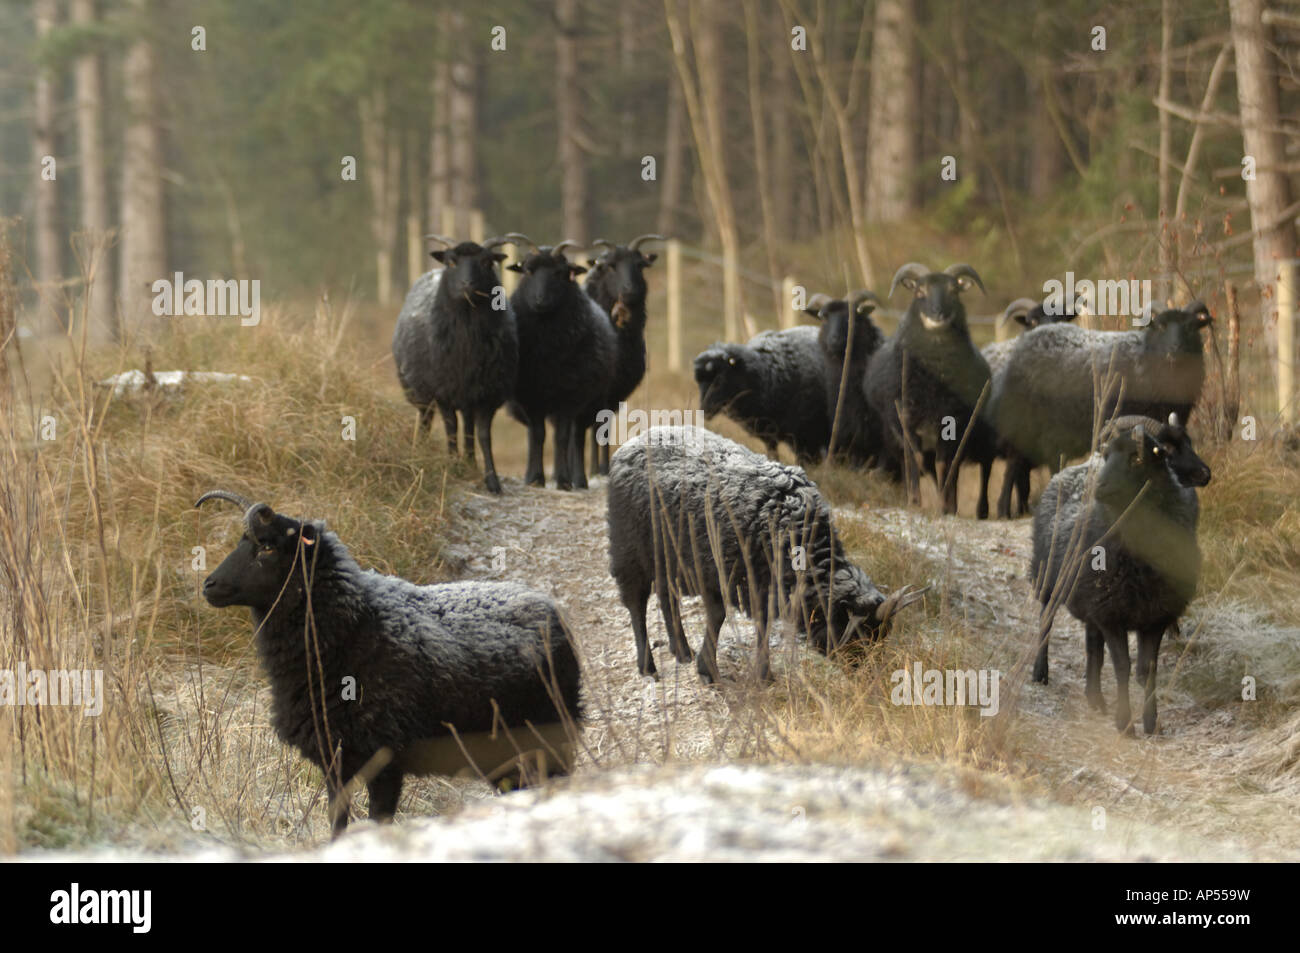 Hebridean sheep covered in frost at Ainsdale Sand Dunes National Nature Reserve Lancashire Stock Photo